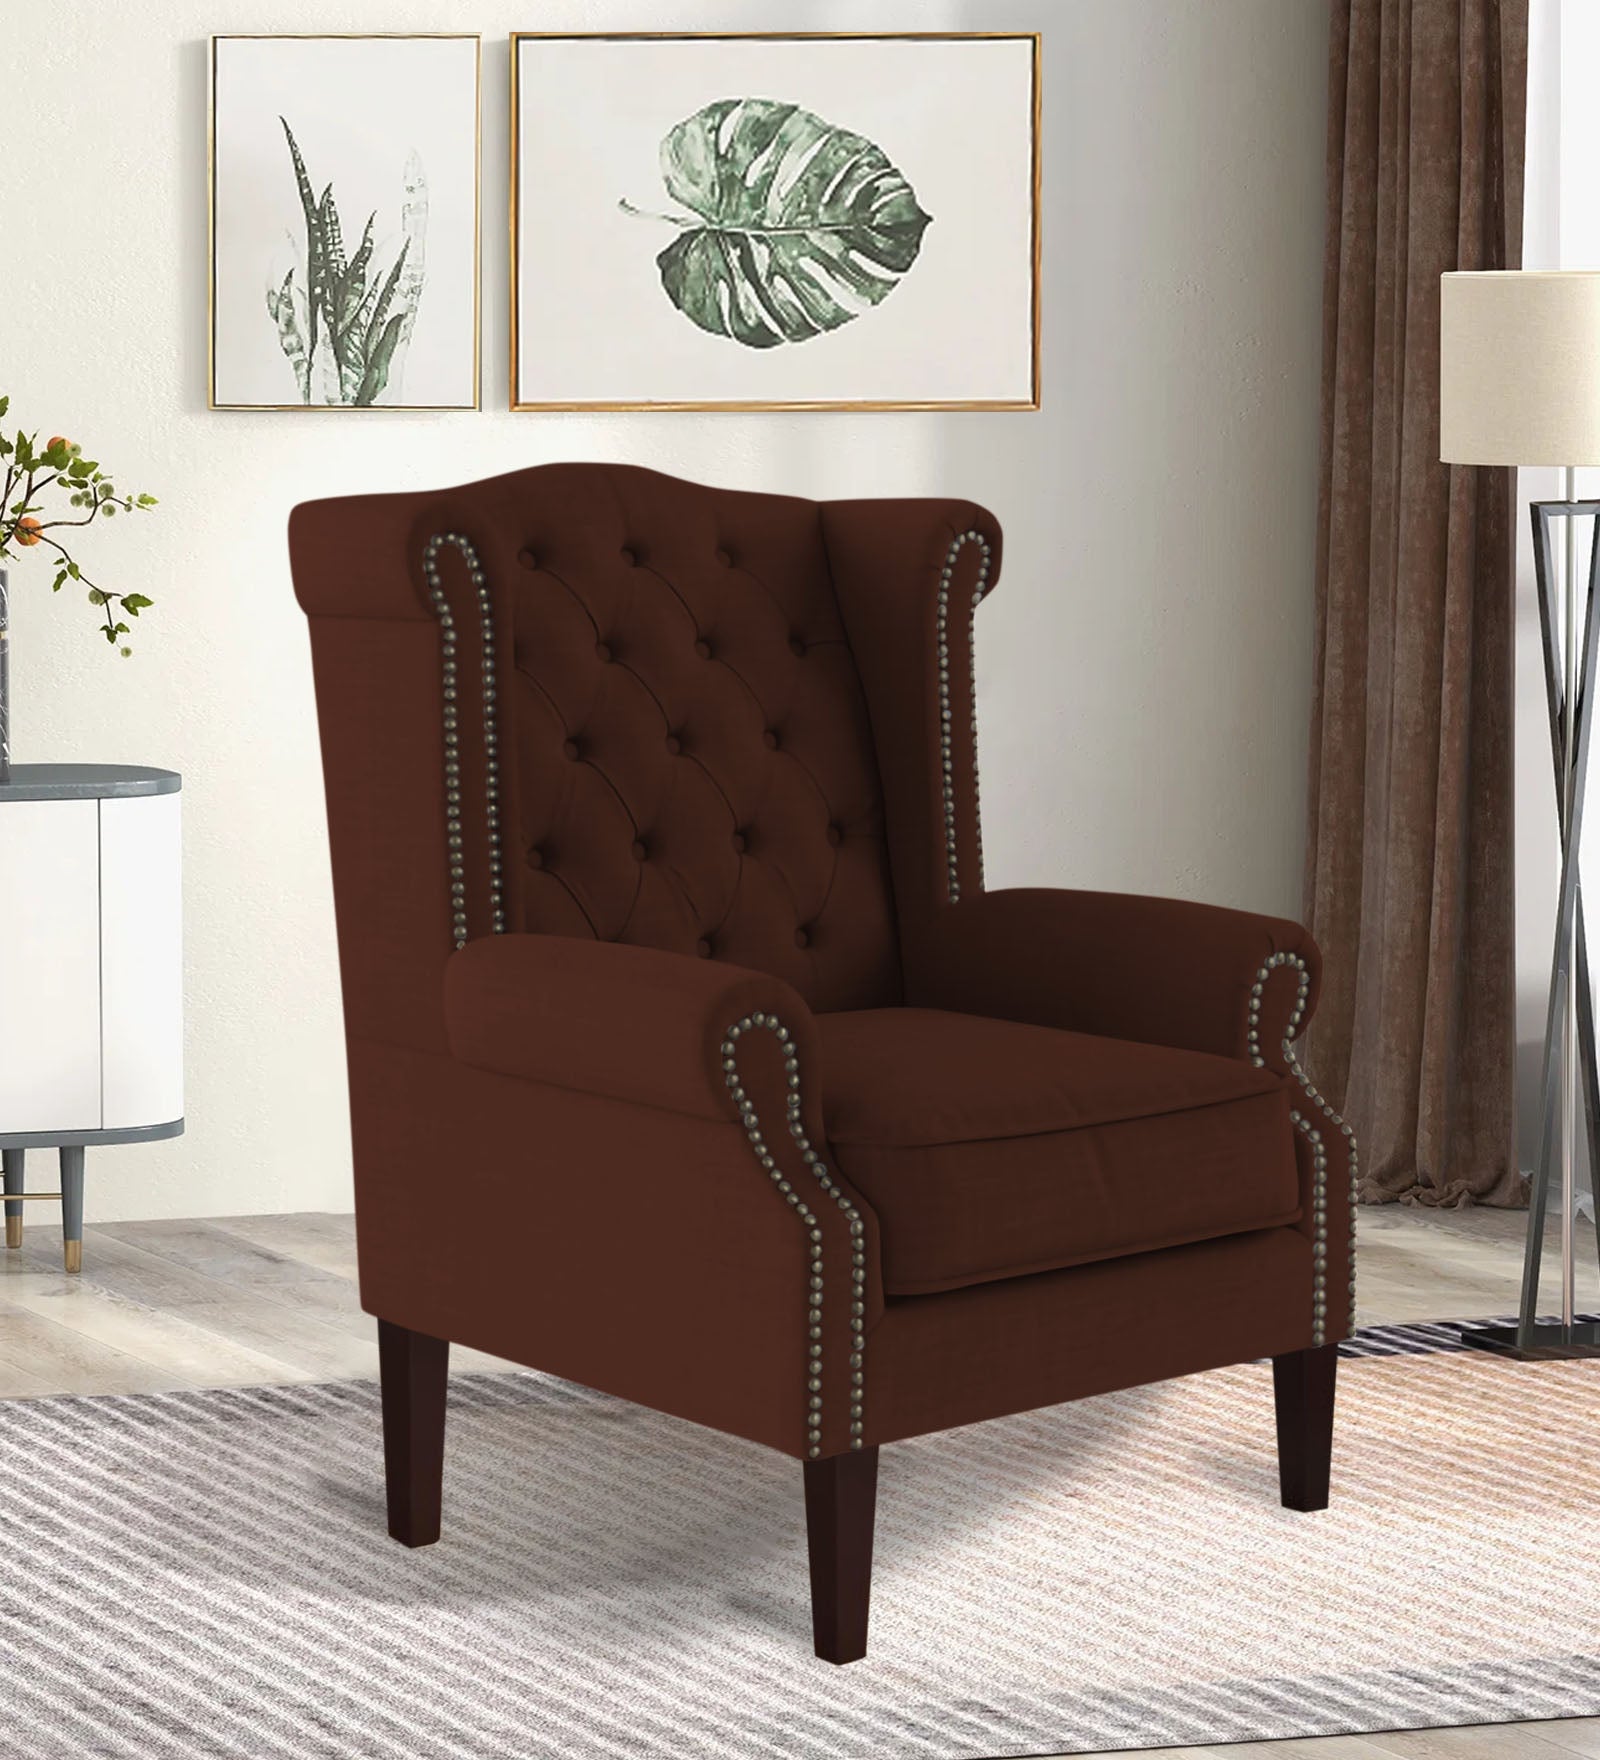 Nottage Fabric Wing Chair in Coffee Brown Colour